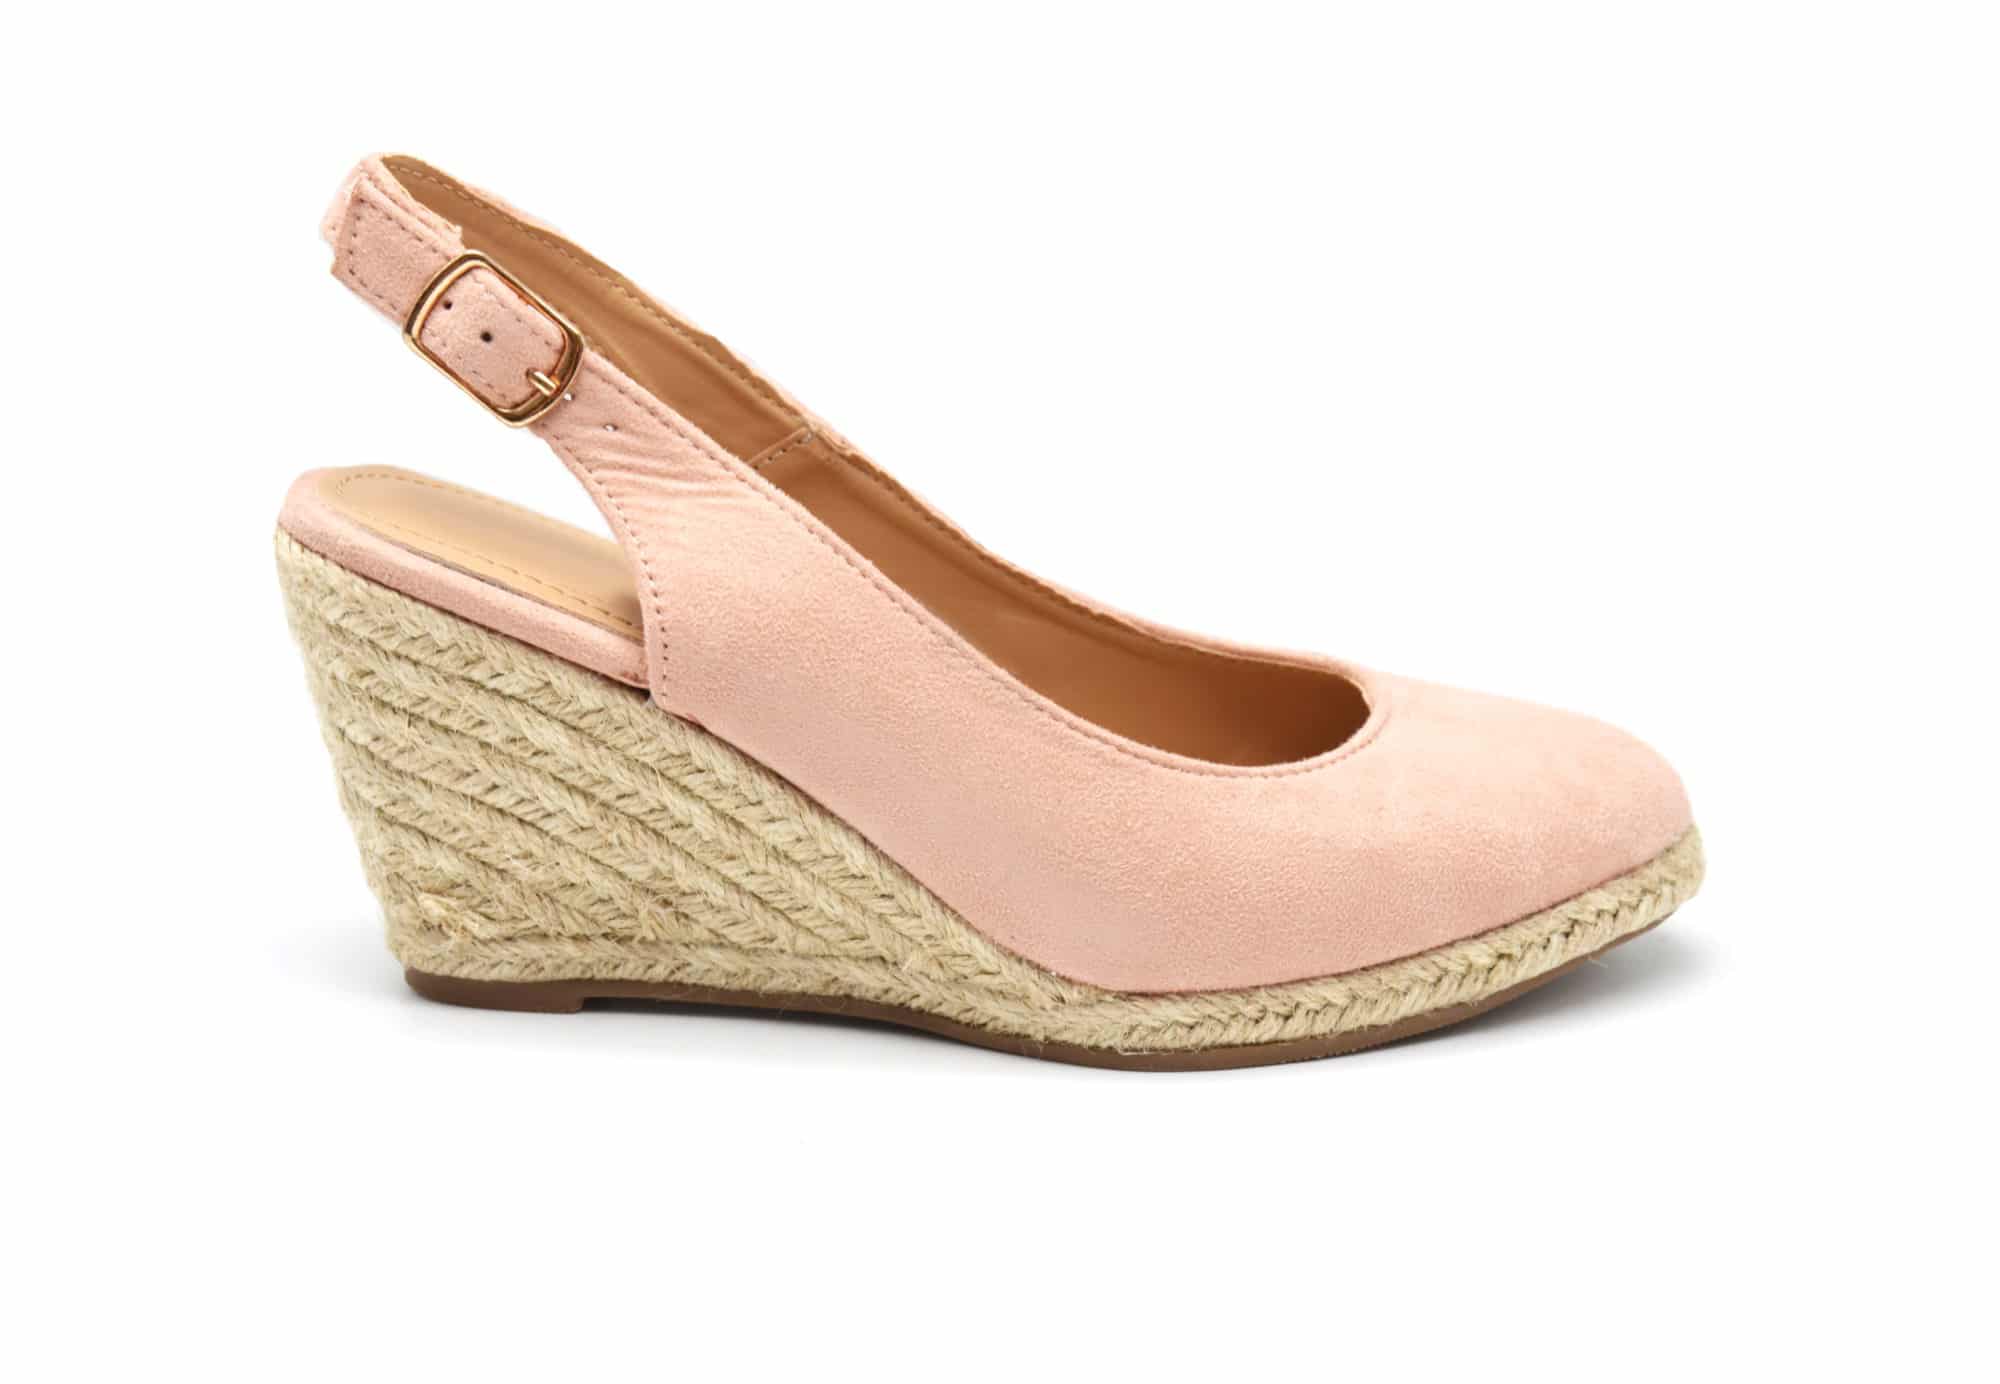 Chaussures Sandales Espadrilles another pair of shoes Espadrille rose style d\u00e9contract\u00e9 